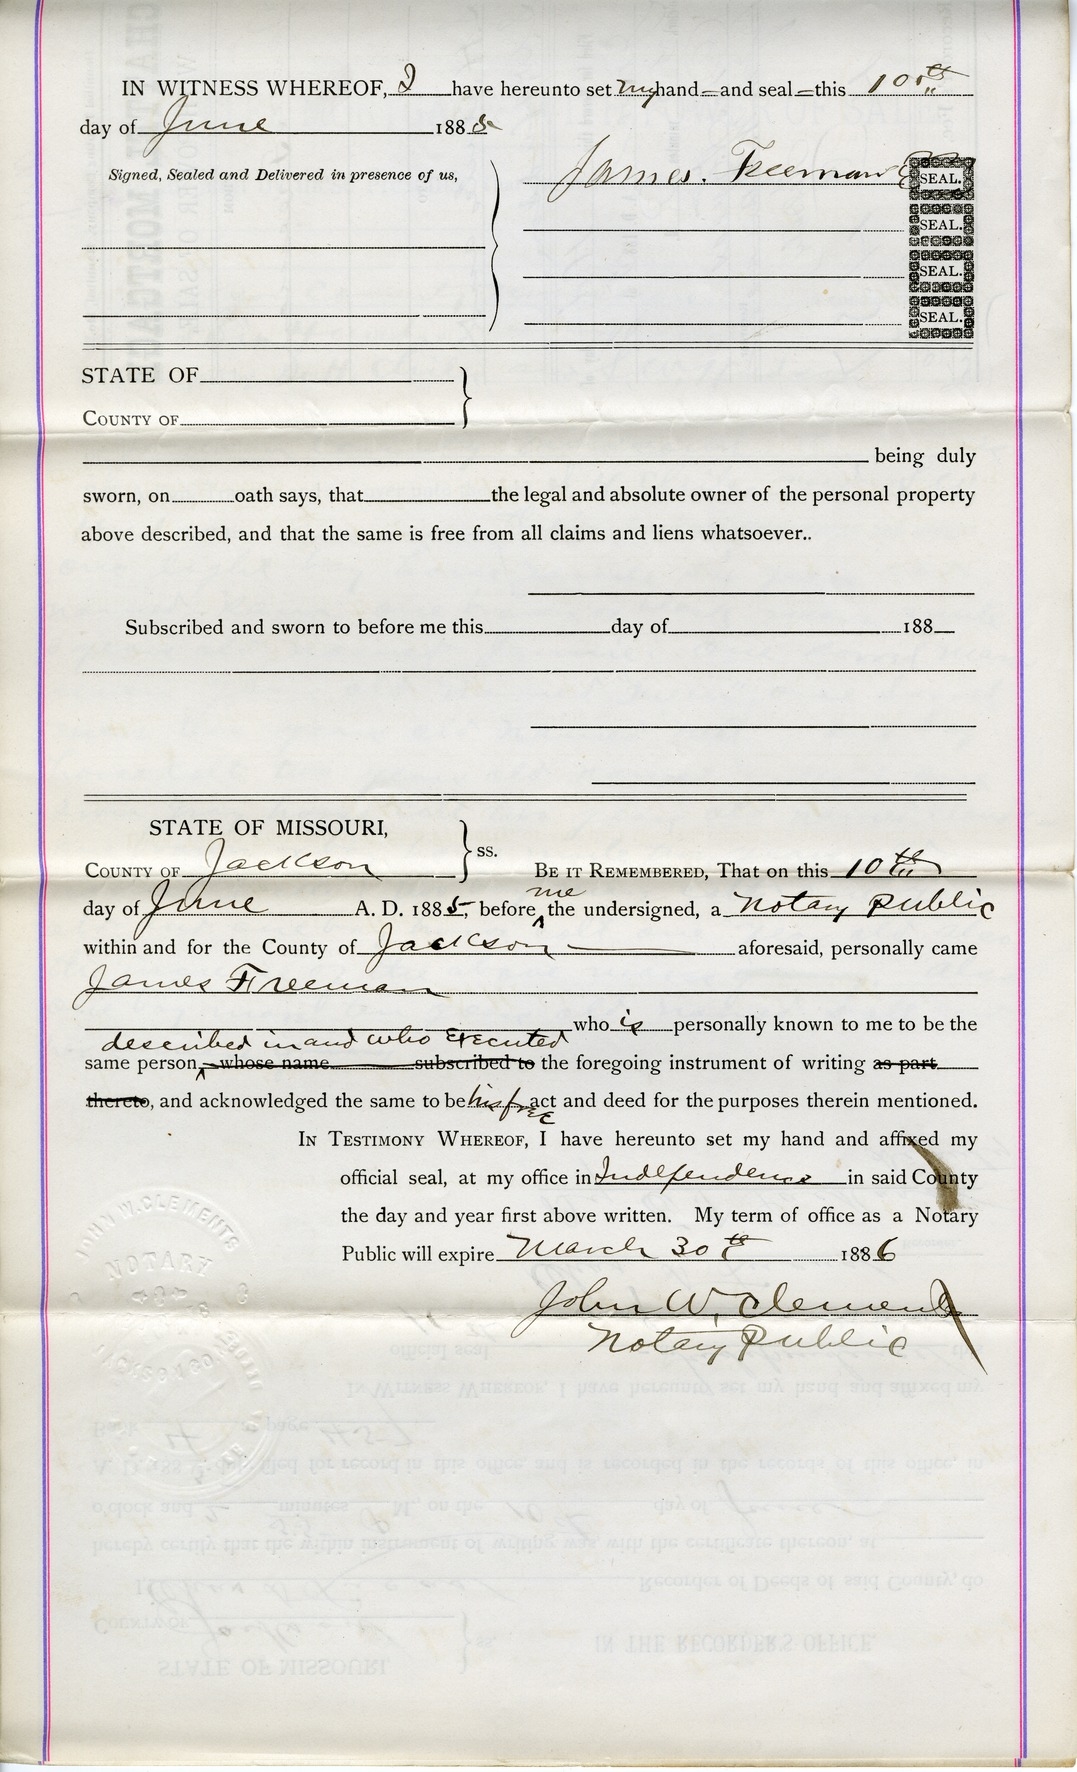 Chattel Mortgage from James Freeman to S. H. Chiles and S. W. Hudson